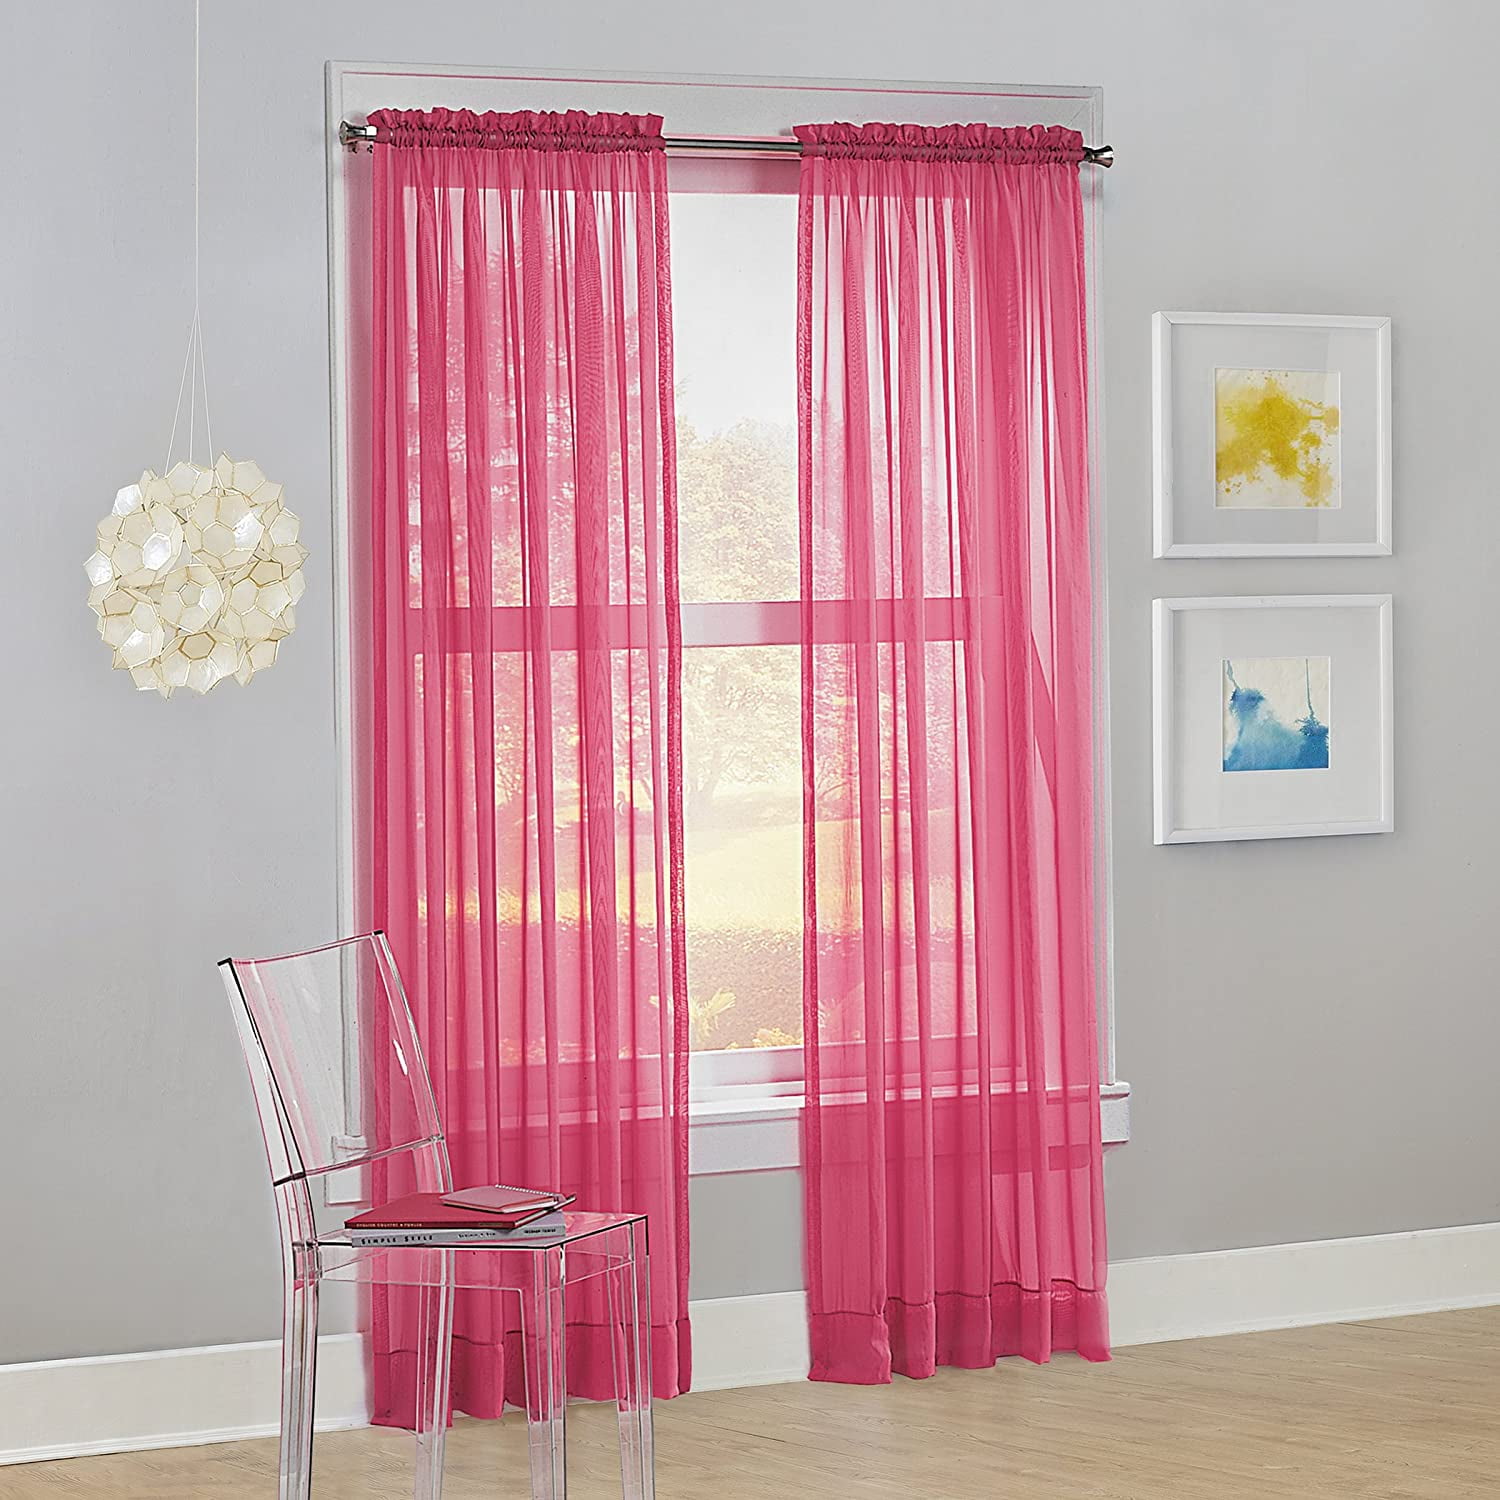 No 59 x 84 1 Panel 918 Calypso Sheer Voile Rod Pocket Curtain Panel Pink